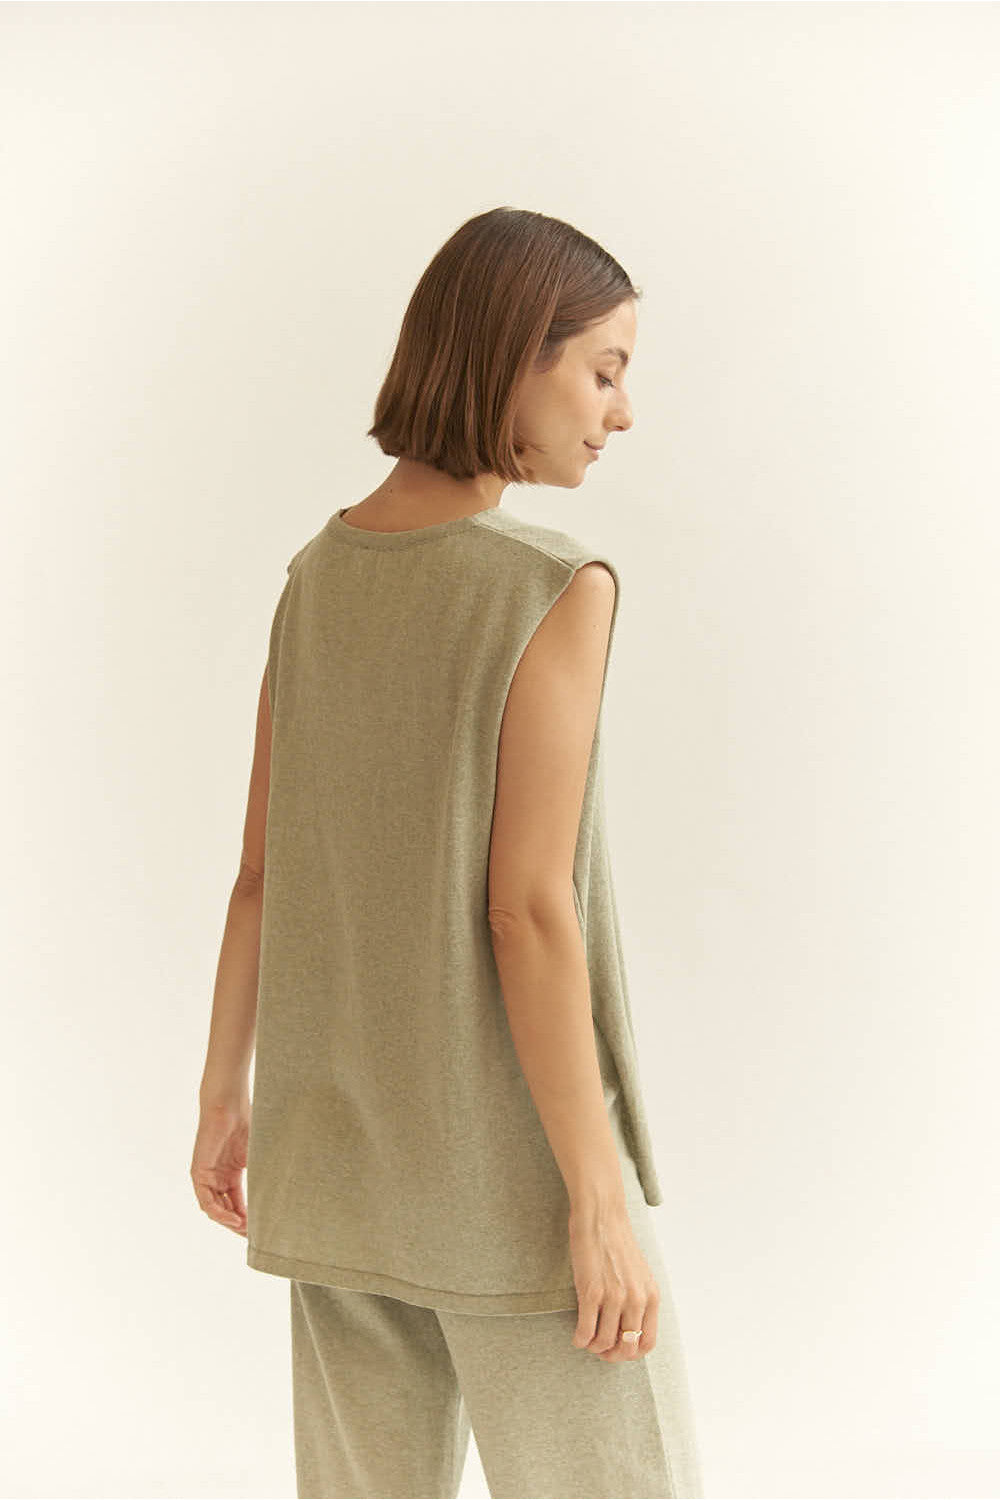 Clico Sleeveless Knitted Top